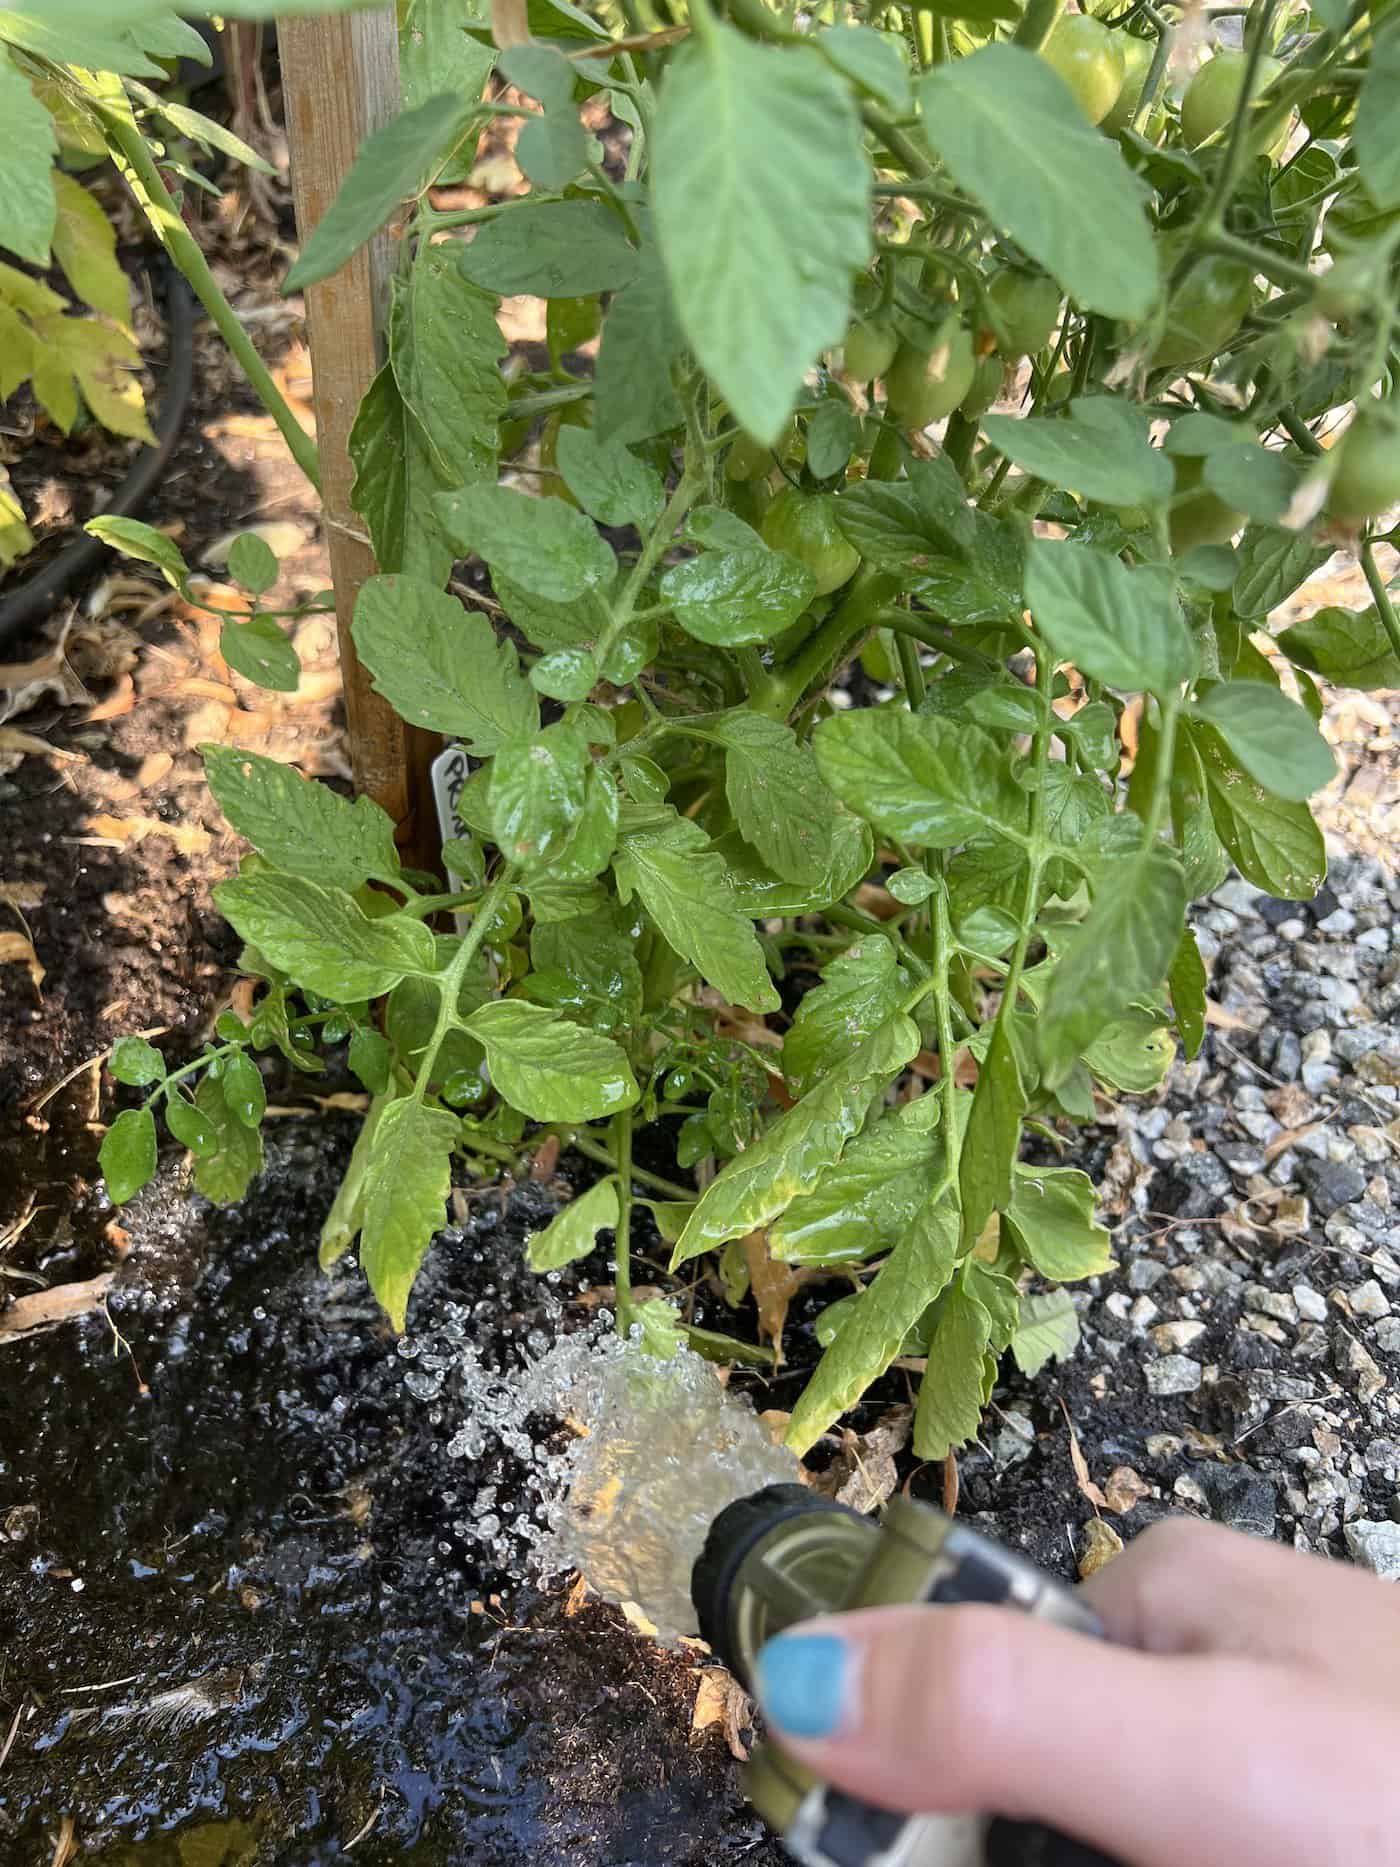 Watering tomatoes with a hoze sprayer nozzle